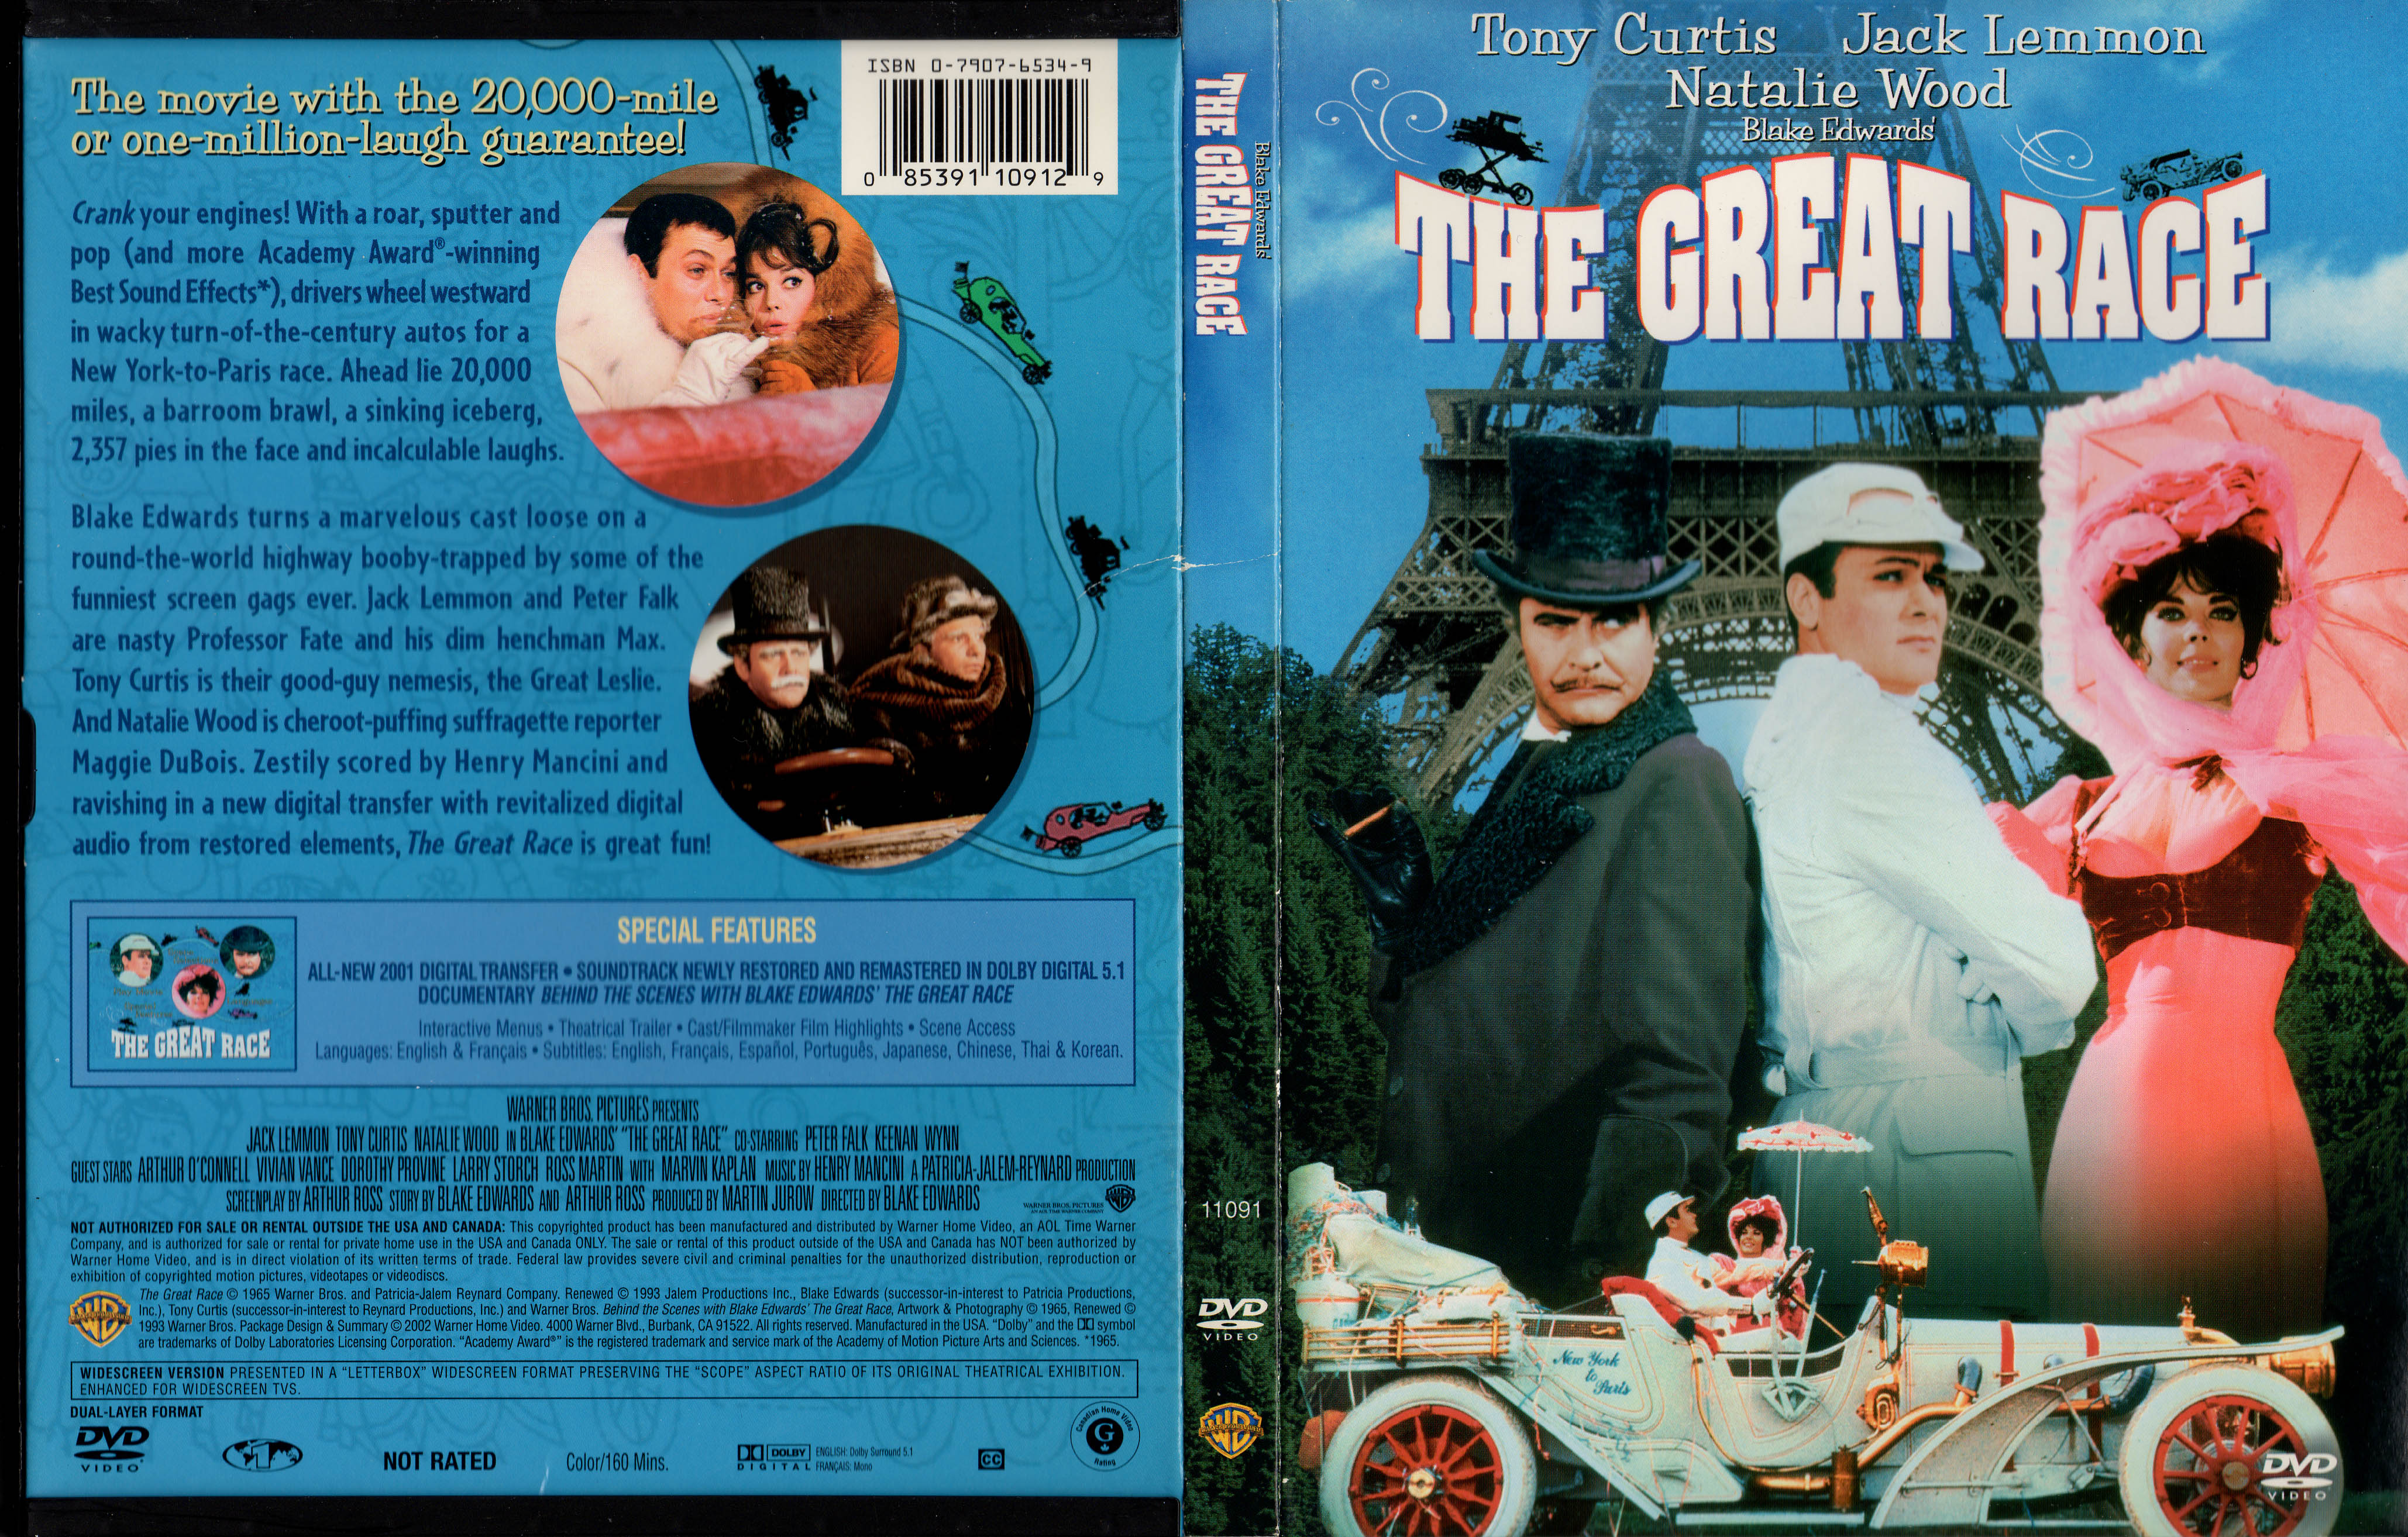 Jaquette DVD The great race